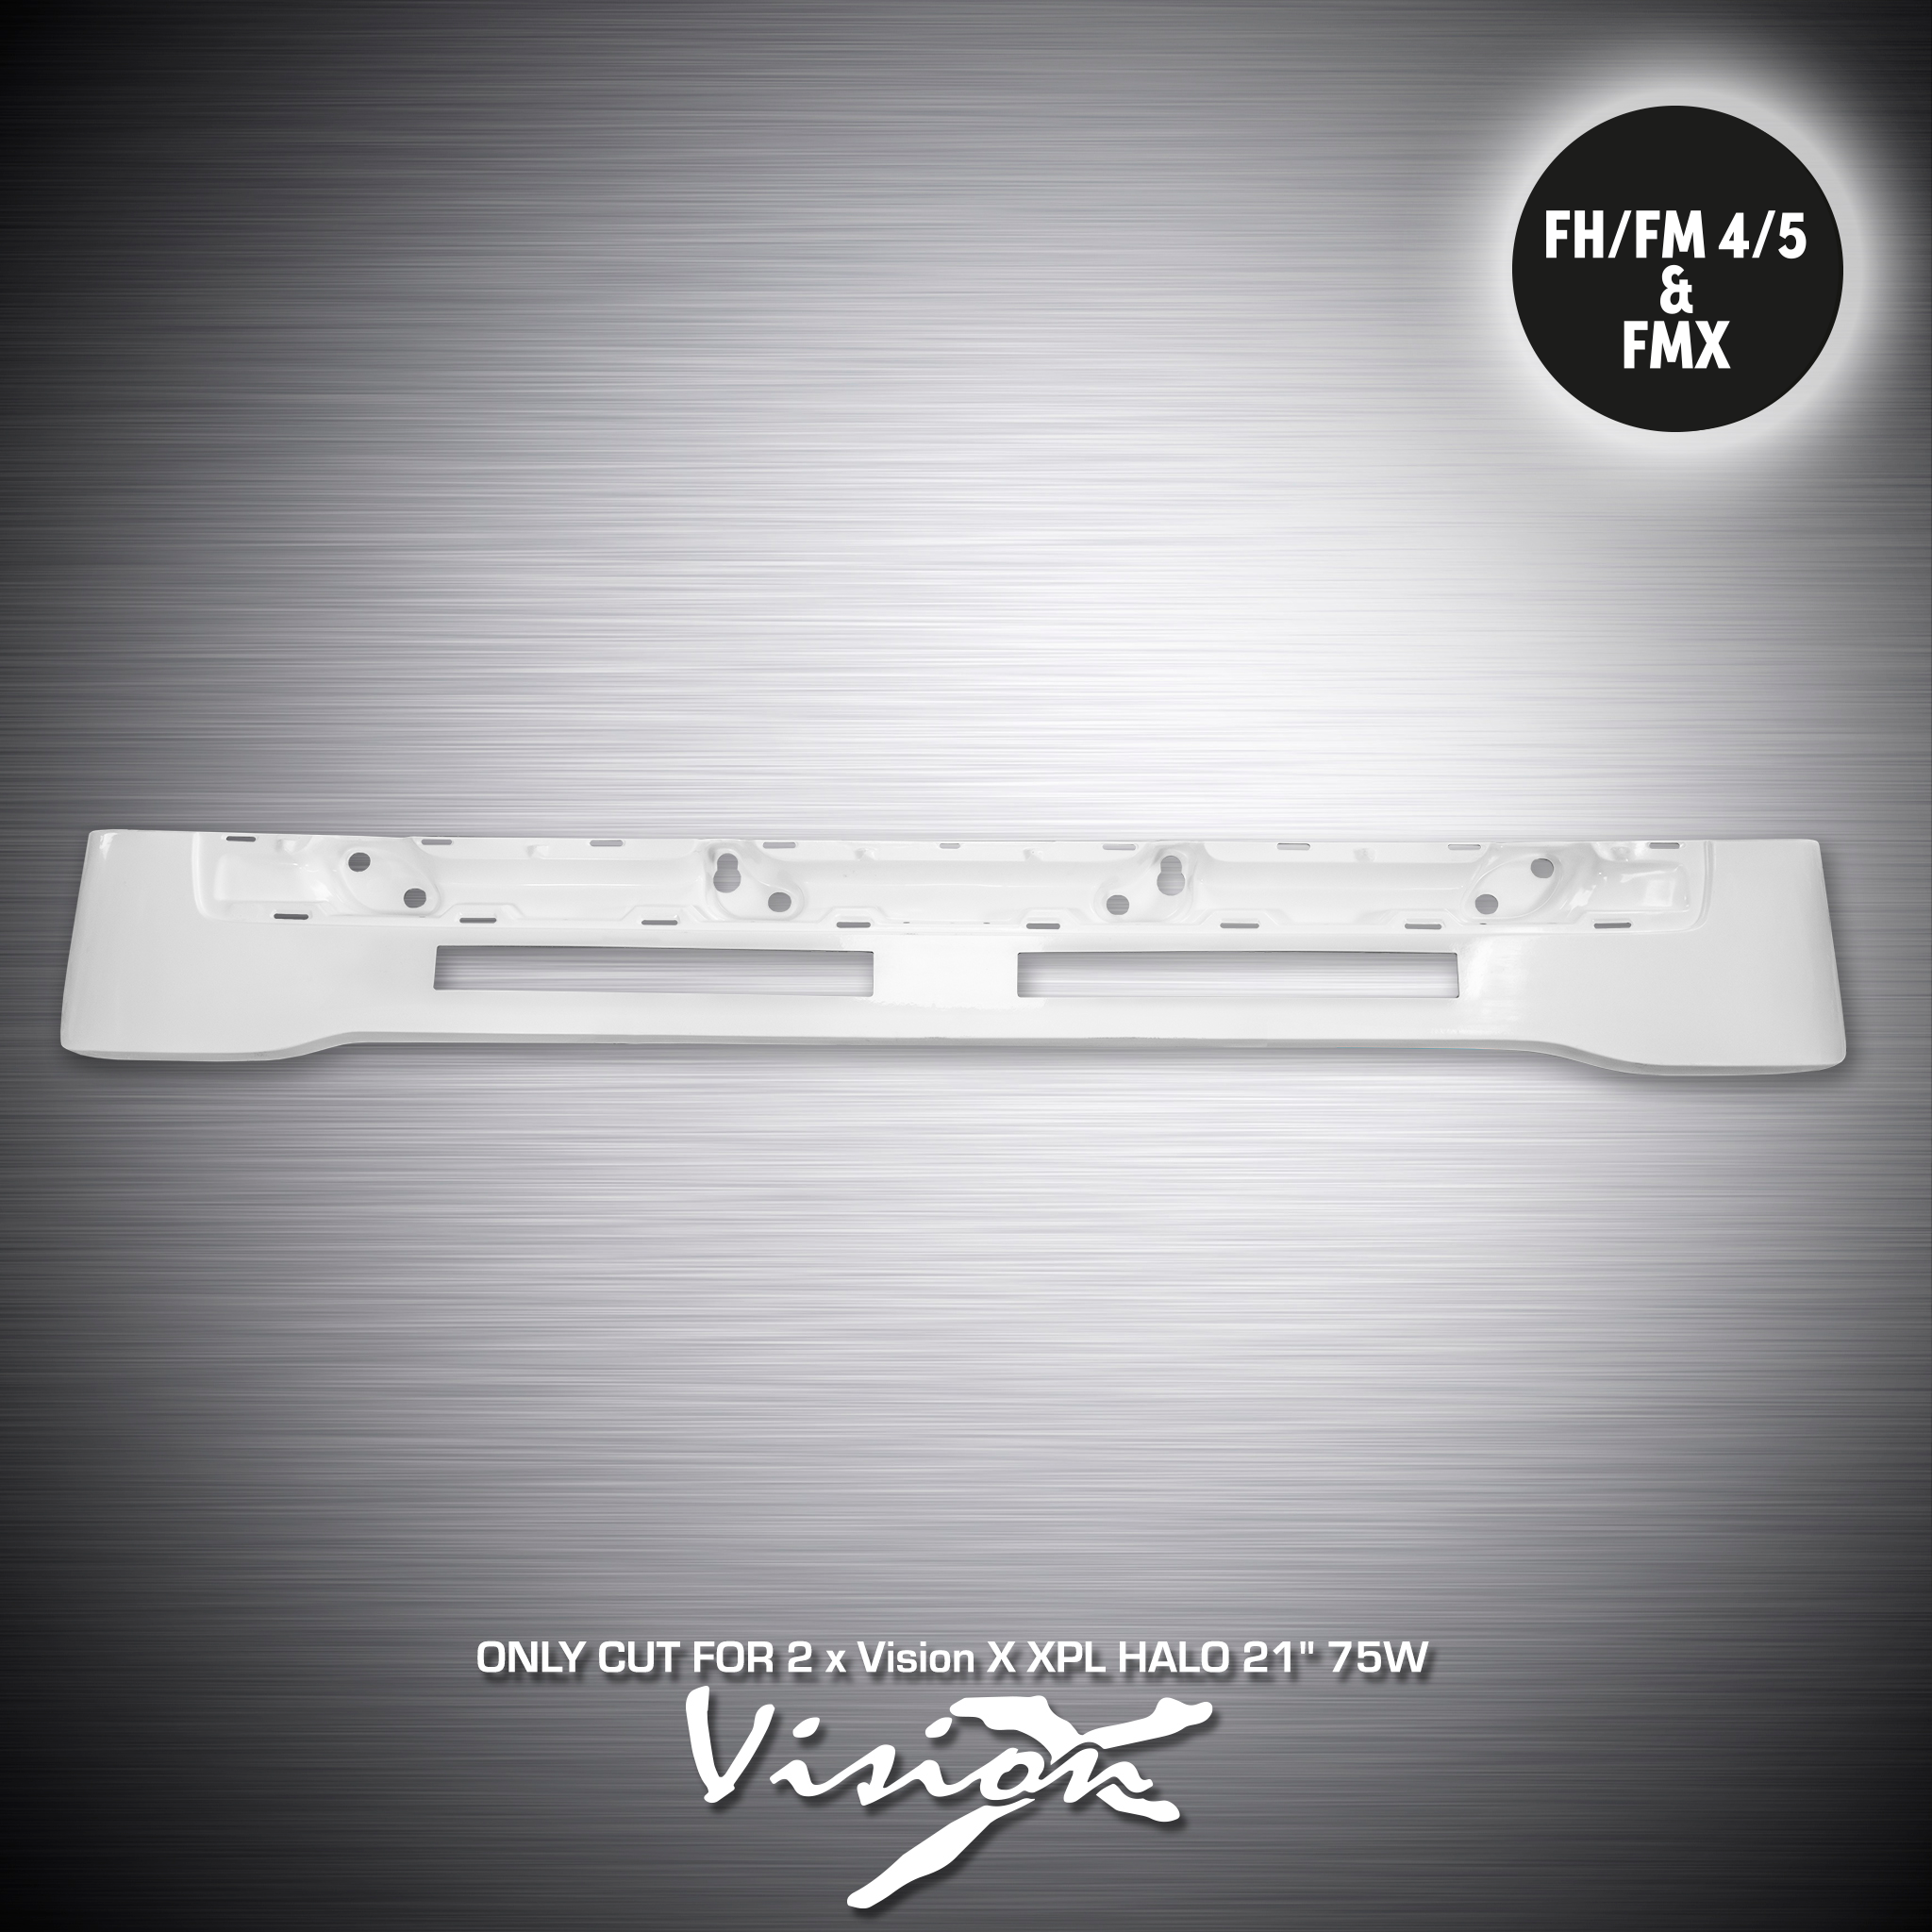 Sunvisor for Volvo FH/FM 4/5 and FMX Prepared for Vision X XPL HALO 21' 75W LED-bars